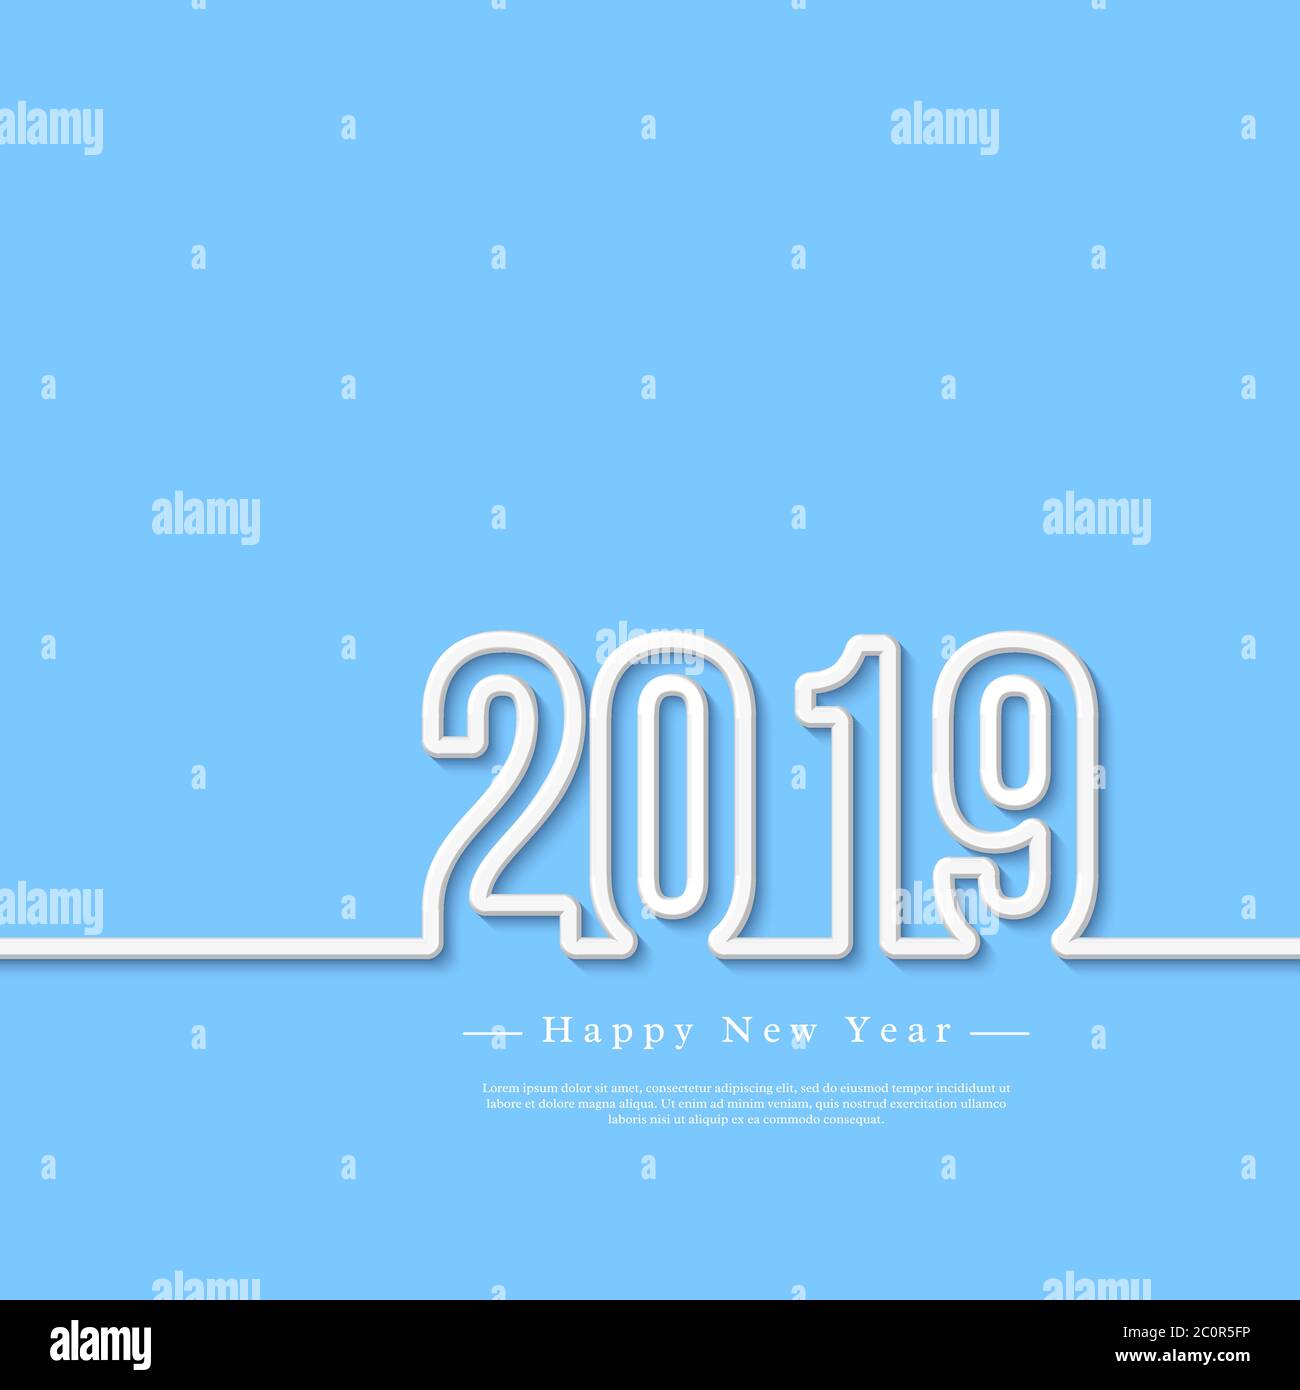 2019 white 3d numbers with shadow on blue background. Happy New Year greeting text, vector illustration. Stock Vector